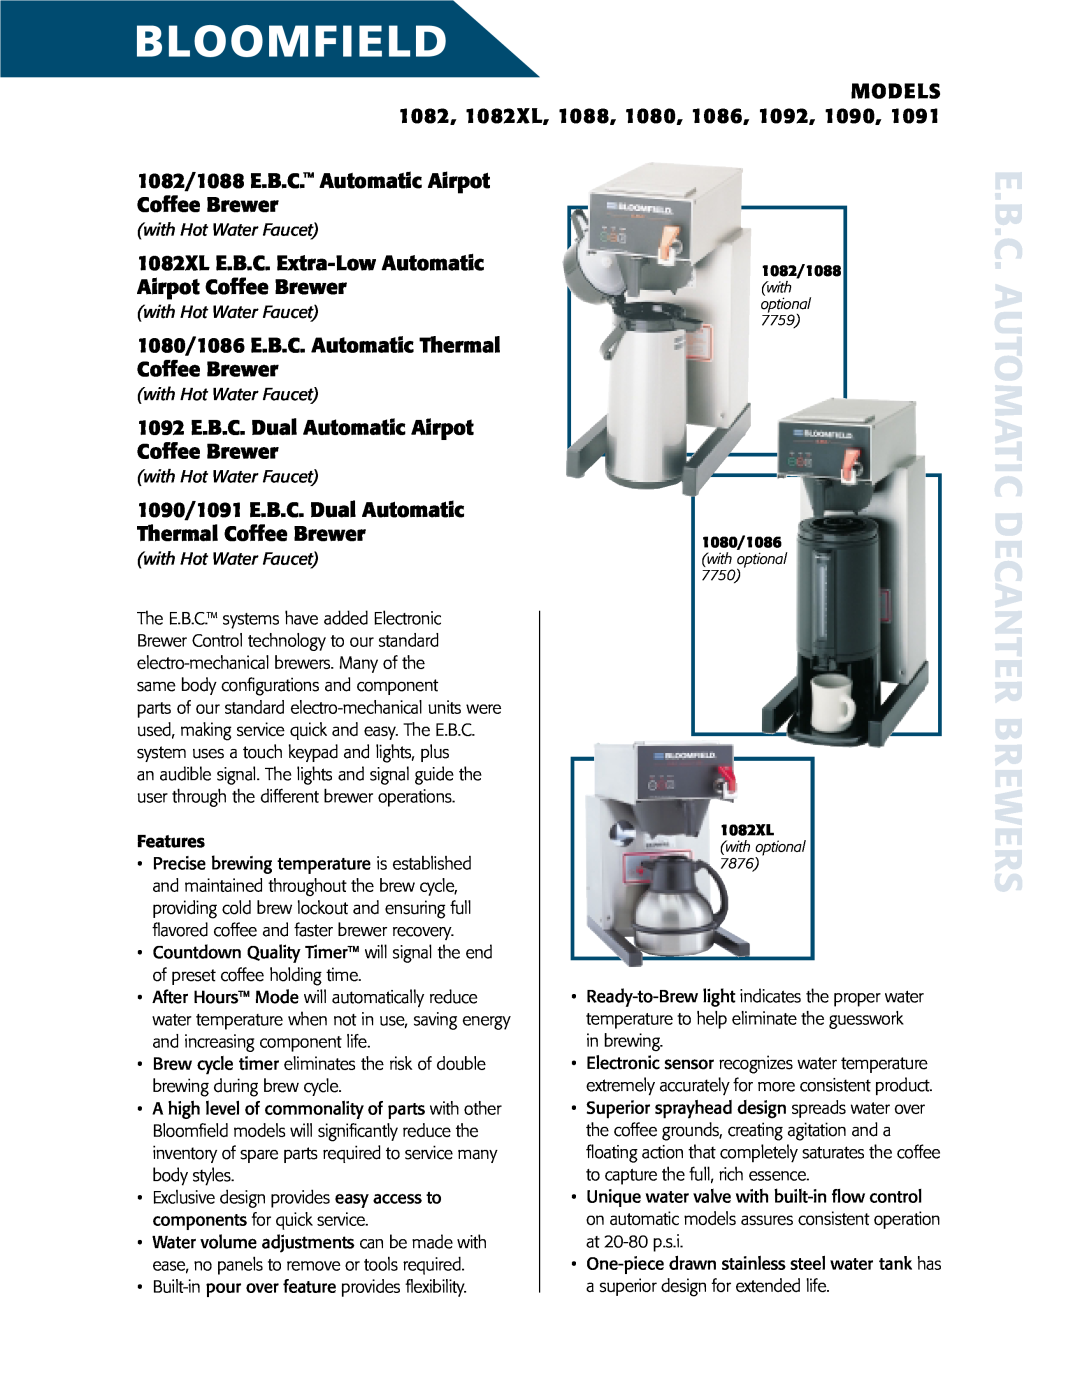 Bloomfield 1092, 1091, 1090 manual 1082, 1082XL, 1082/1088 E.B.C. Automatic Airpot Coffee Brewer, MODELS 1088, 1080 